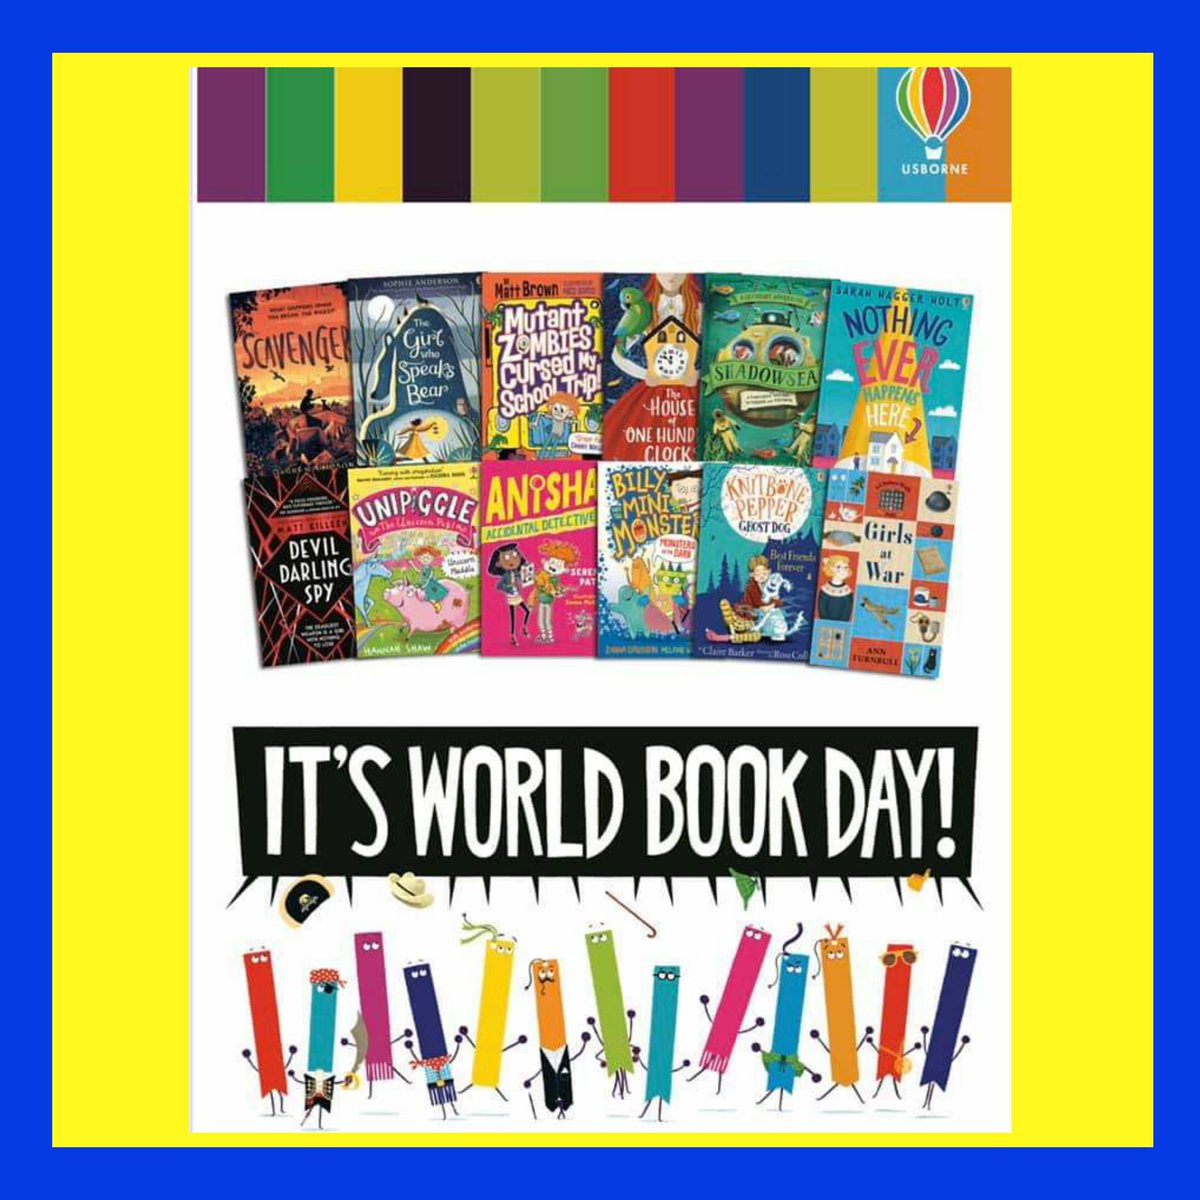 Happy #worldbookday2020! Are you #sharingstories, has your little one #dressedup, we are at a #school #bookfair this afternoon. Have fun celebrating today and a huge shout out to the amazing #Usborneauthors and #Usborneorganisers bringing stories to life today and every day.